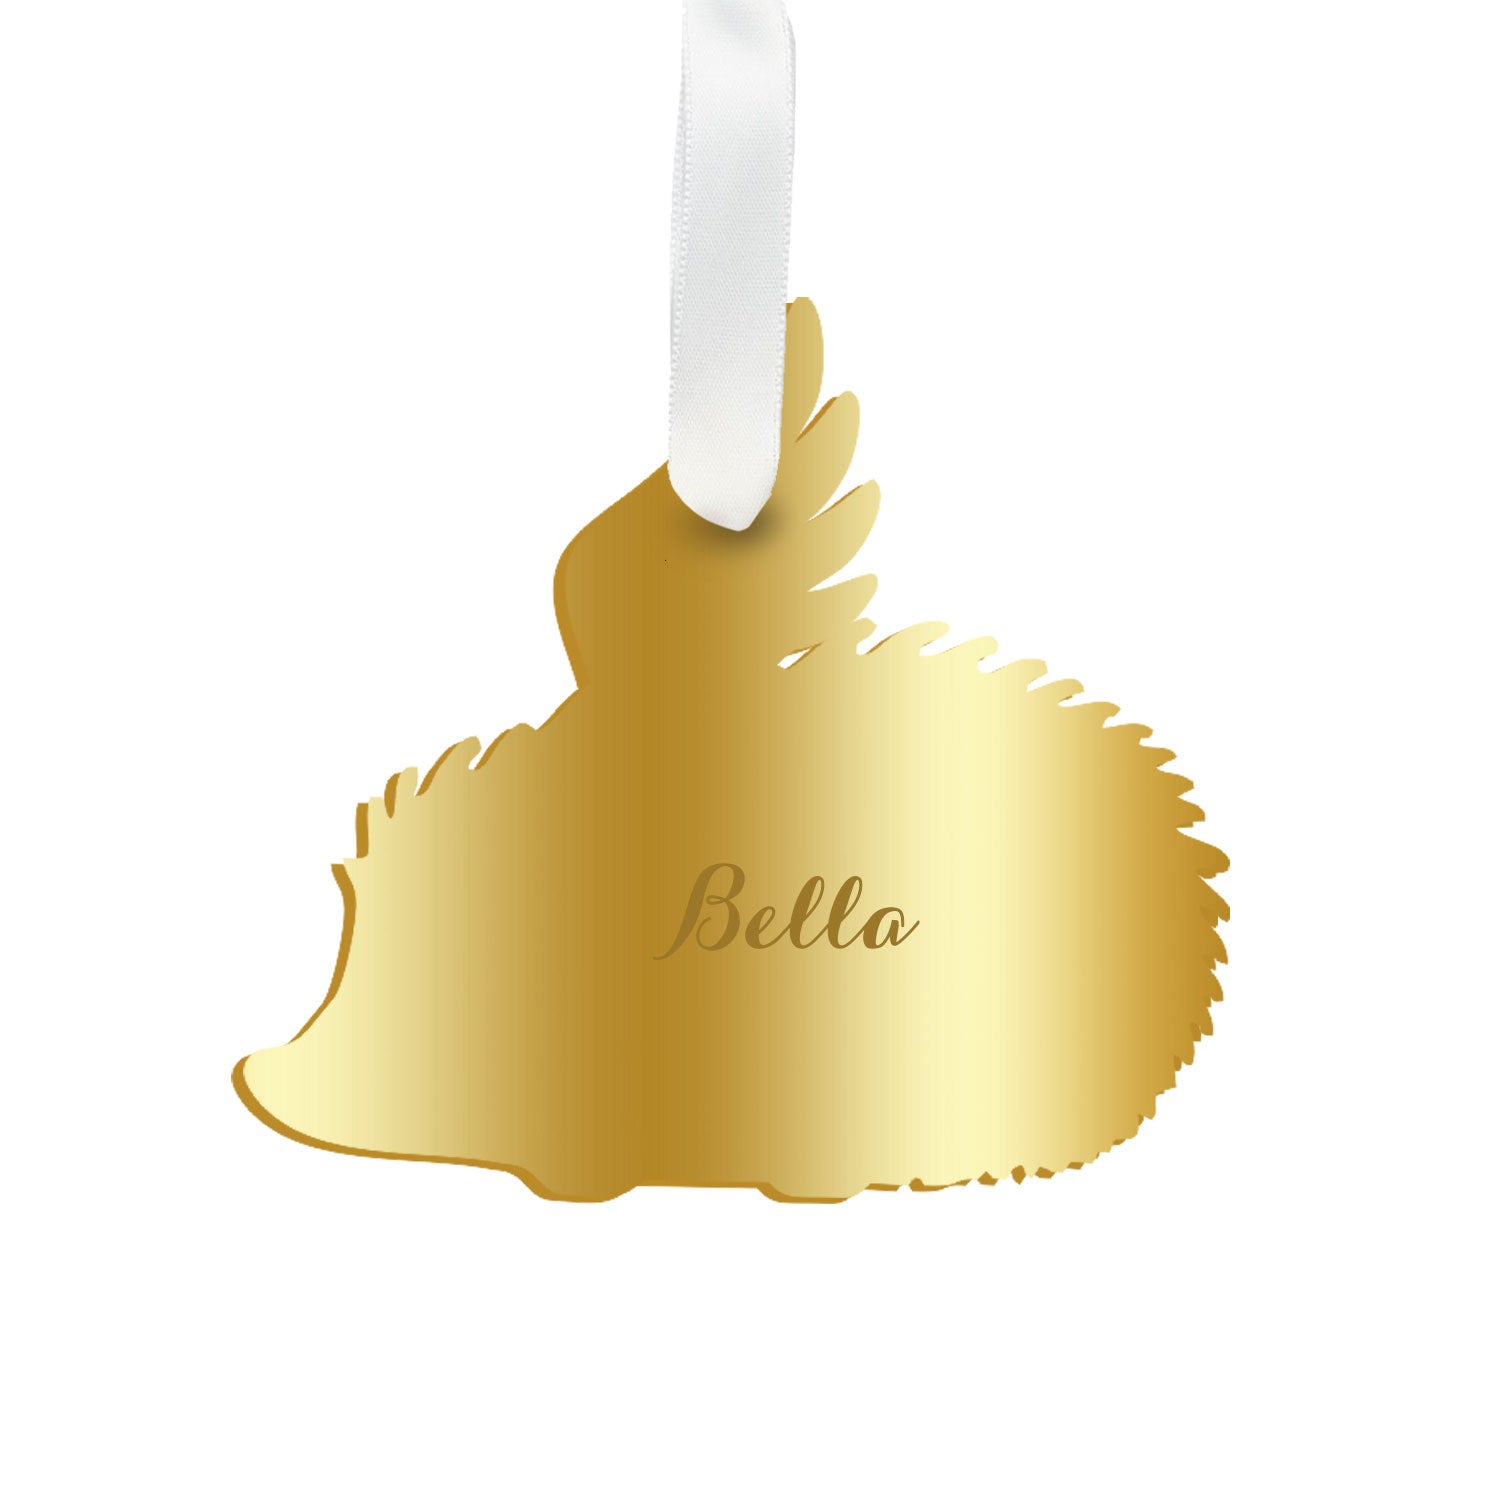 Moon and Lola - Personalized Angel Hedgehog Ornament with wings in gold